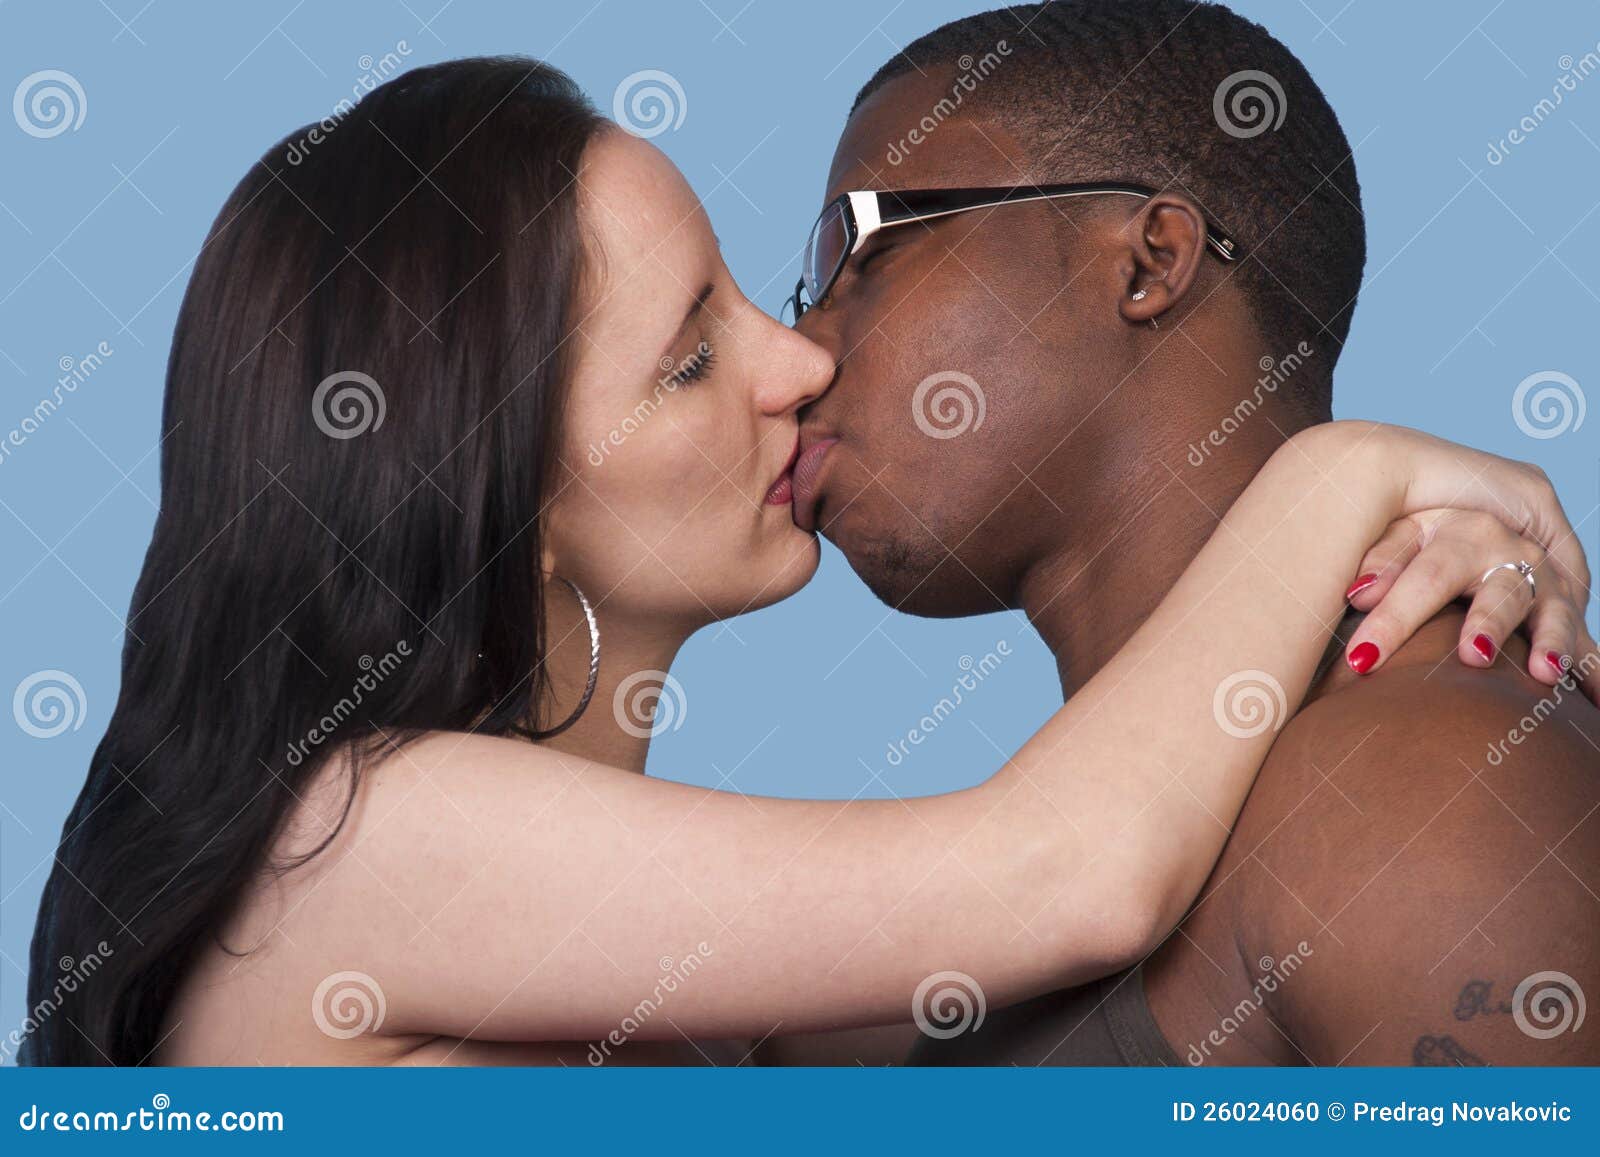 Passionate Kiss a White Woman and Black Man Stock Photo pic